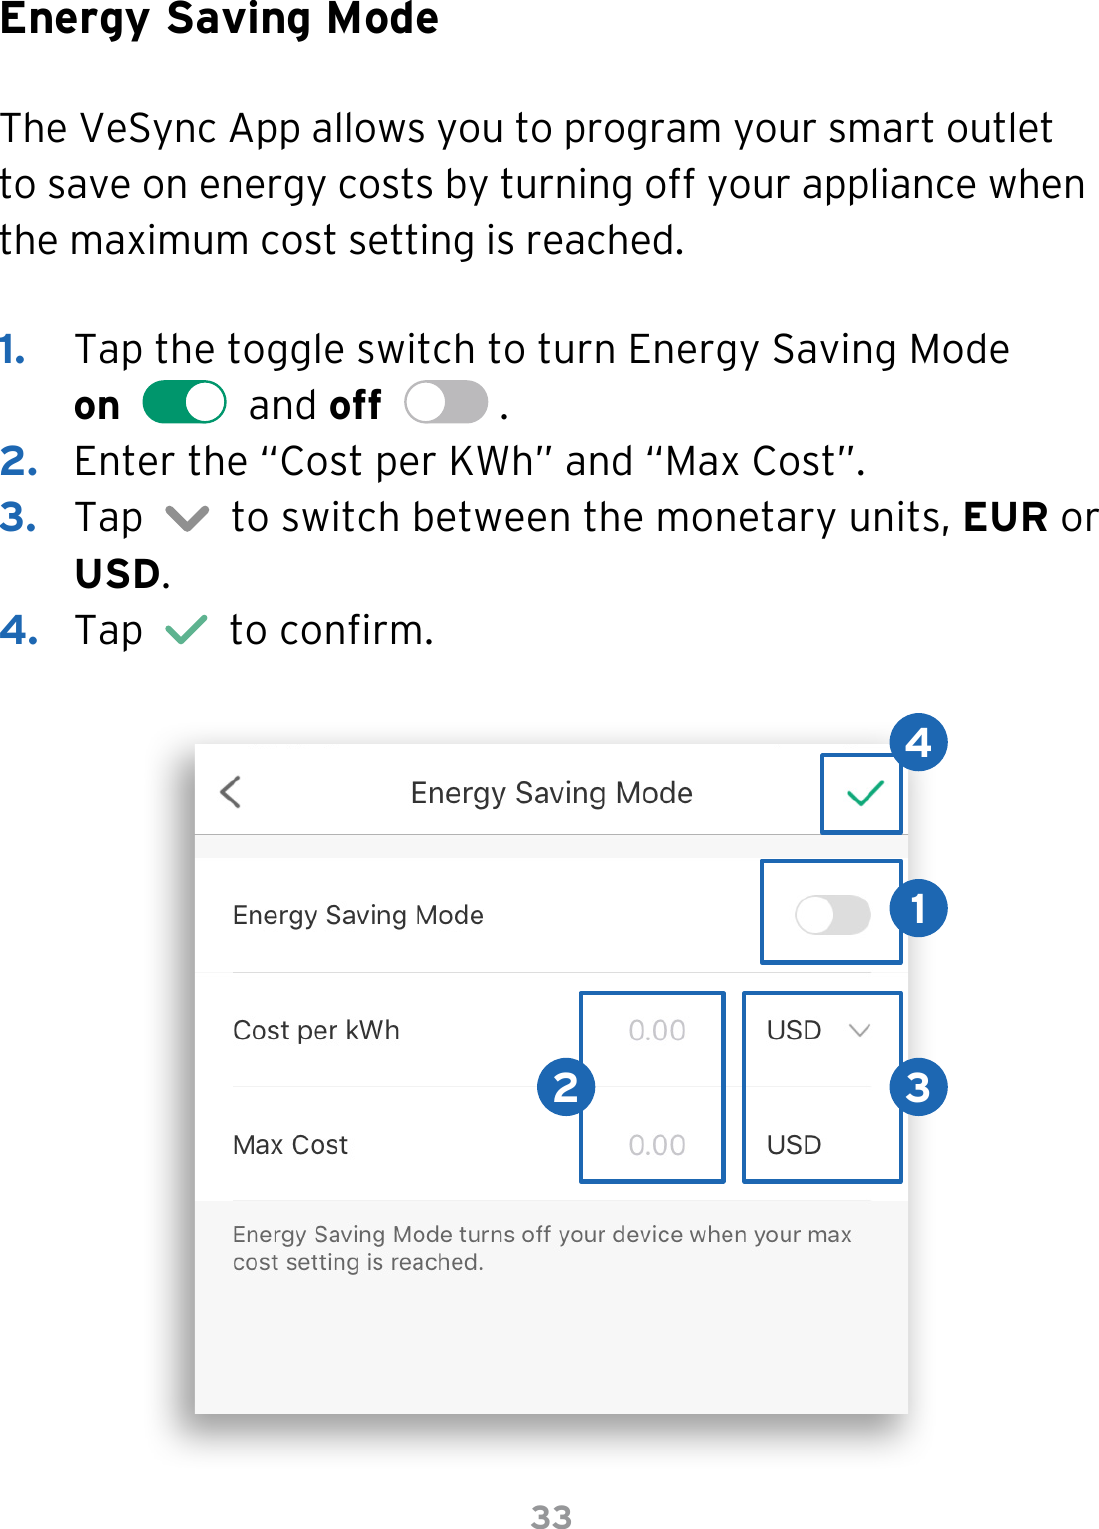 33Energy Saving ModeThe VeSync App allows you to program your smart outlet to save on energy costs by turning off your appliance when the maximum cost setting is reached.1.  Tap the toggle switch to turn Energy Saving Mode  on     and off    . 2.  Enter the “Cost per KWh” and “Max Cost”.3.  Tap     to switch between the monetary units, EUR or USD.4.  Tap     to conrm.12 34